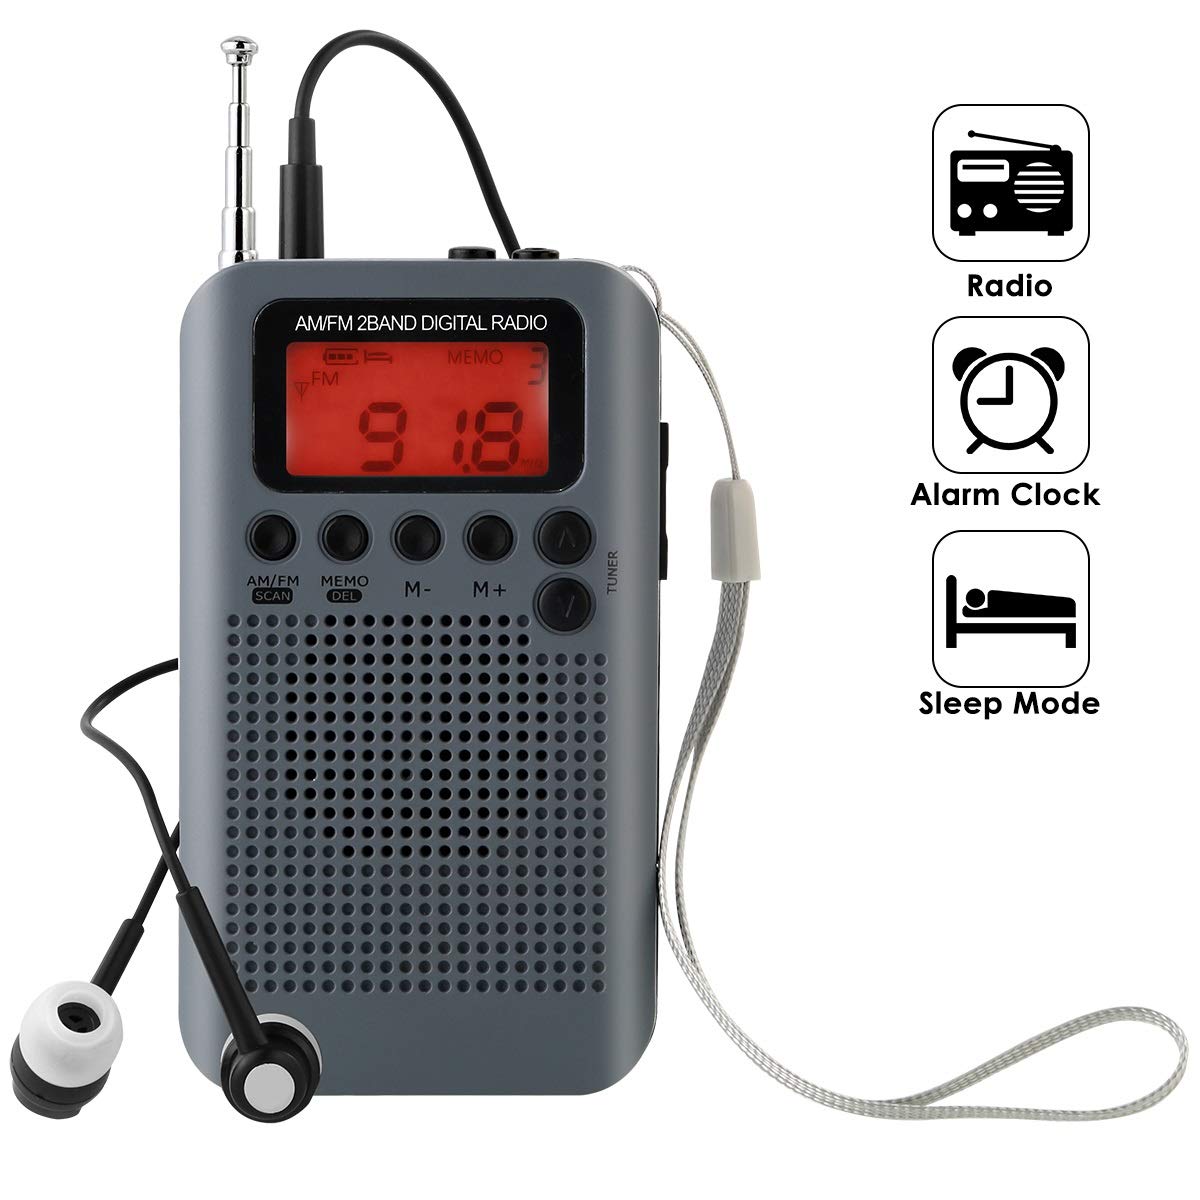 Portable AM FM Two Band Radio with Alarm Clock & Sleep Timer Digital Tuning Stereo Radio with 3.5mm Headphone Jack for Walking Jogging Camping gray